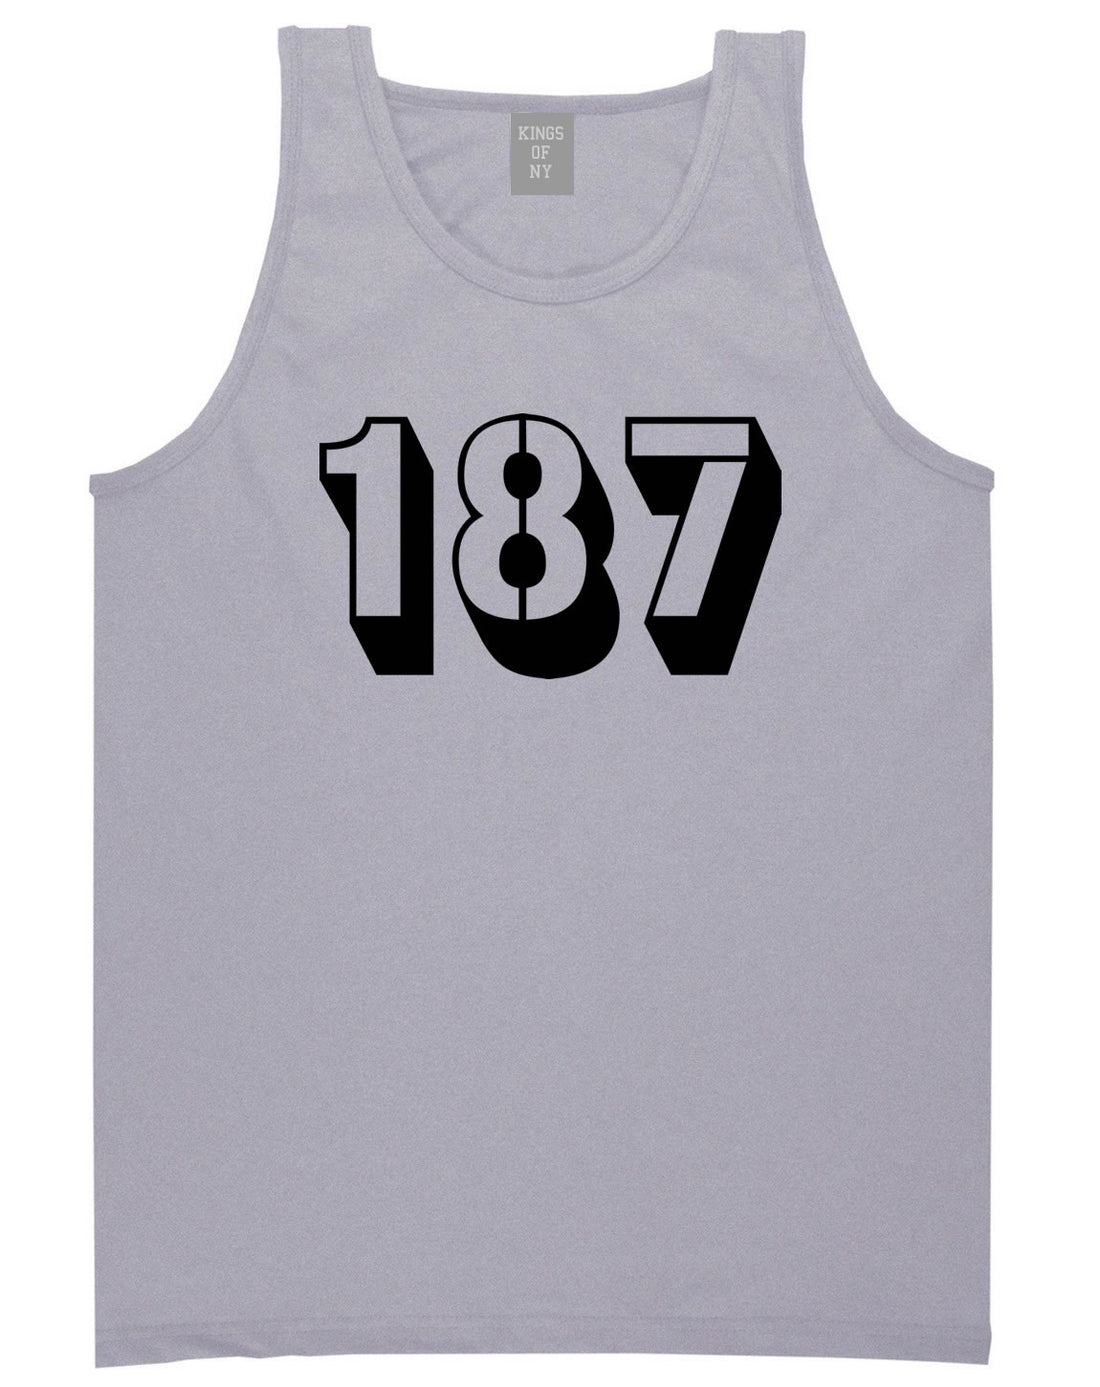 187 Tank Top in Grey by Kings Of NY